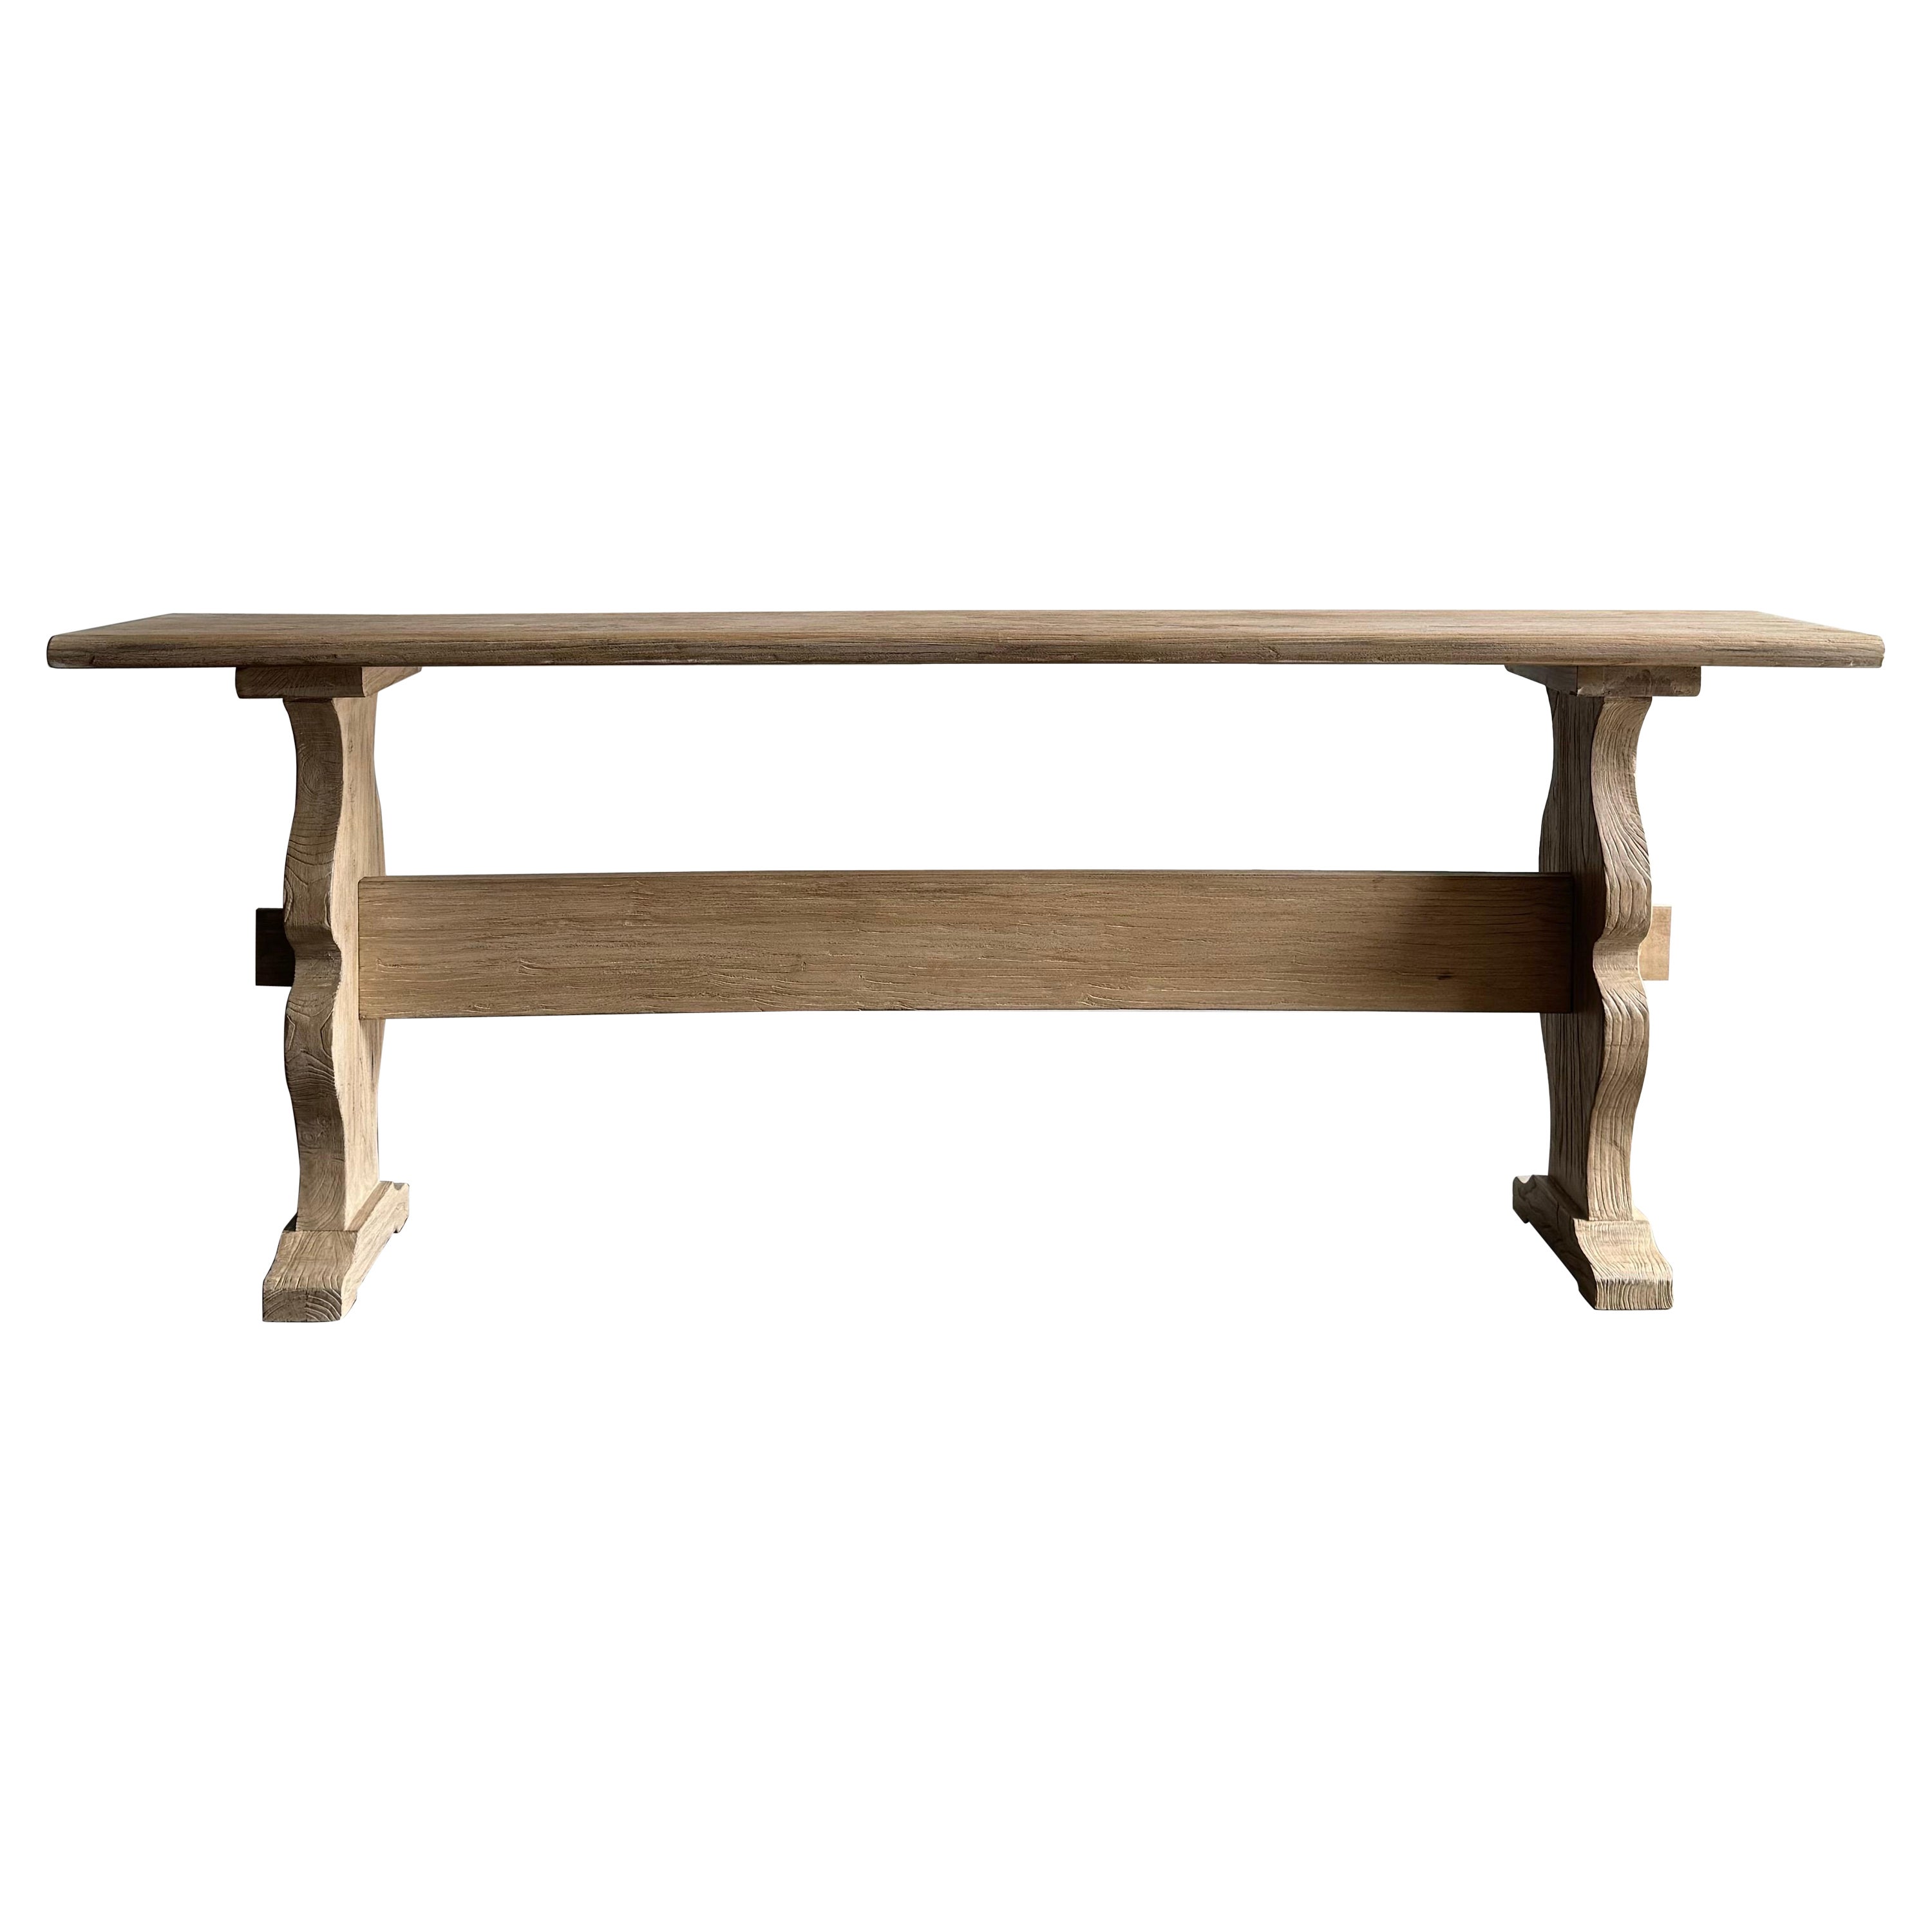 Amber reclaimed elm wood console table For Sale